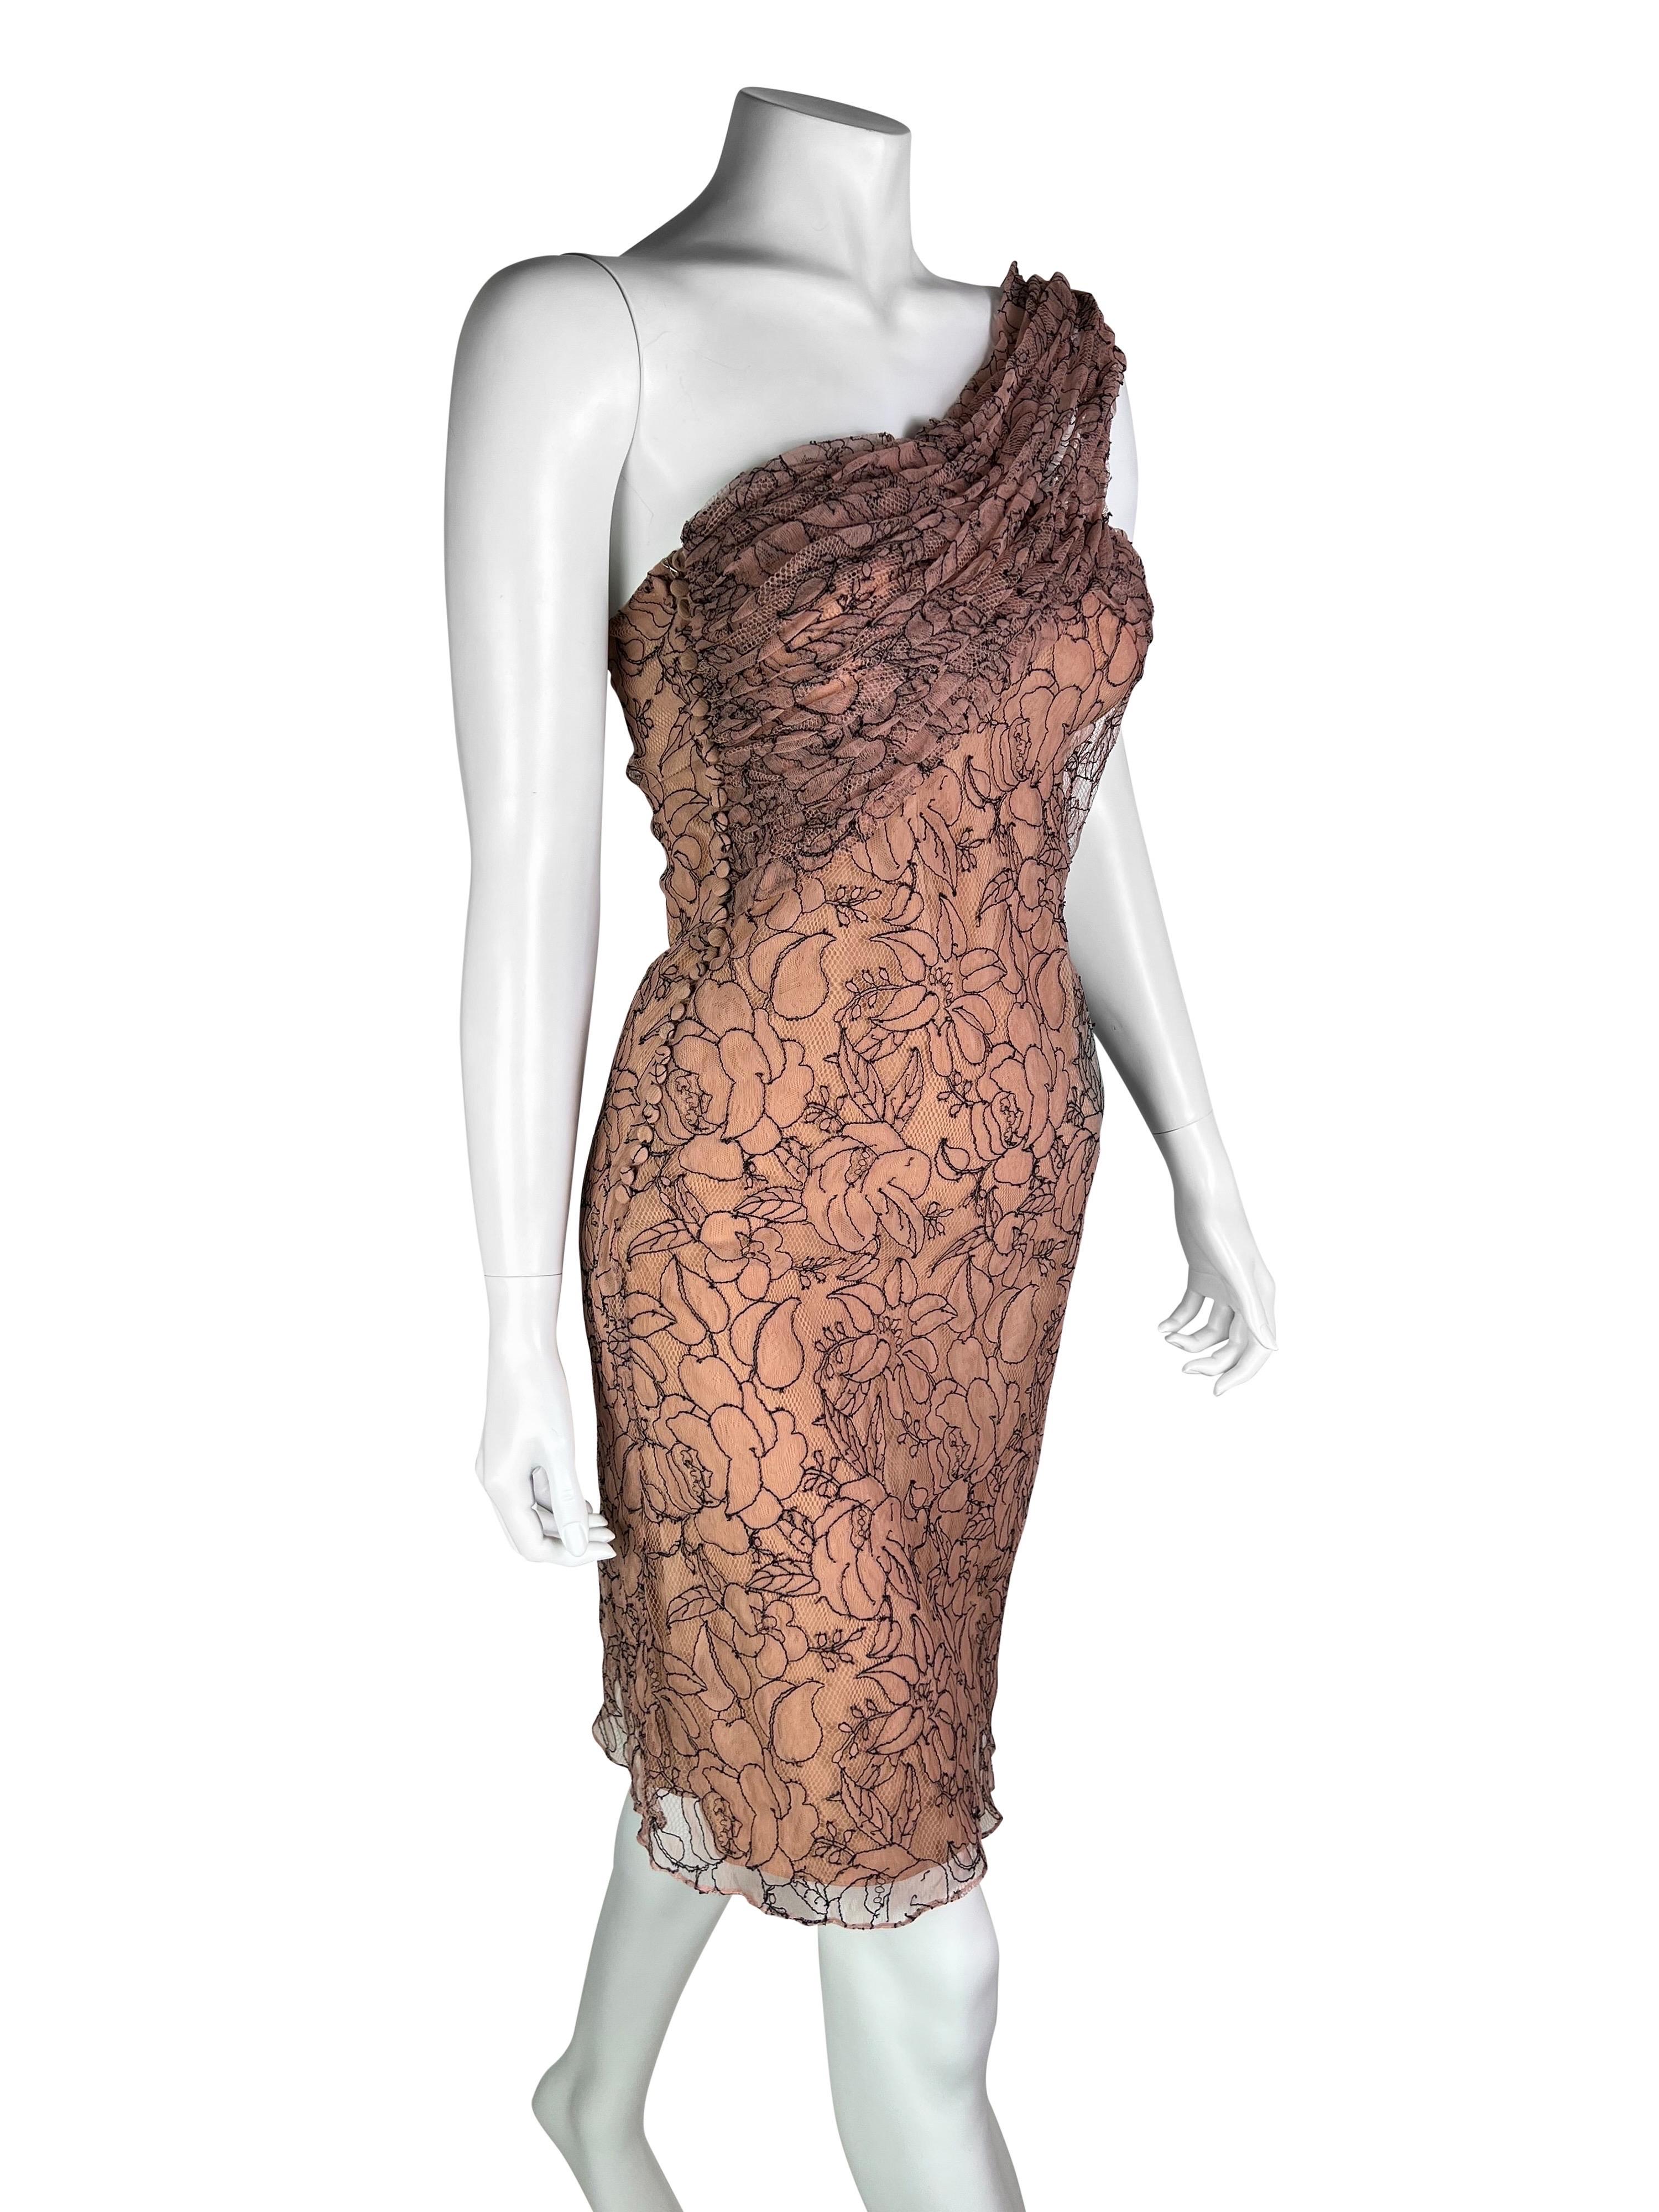 A stunning silk dress with a gorgeous layer of intricate lace, signature for the collection neutral color, flattering on any complexion. 

Size FR 38.

Measurements (flat lay on one side):

Armpit to armpit - 41 cm (16 in)
Waist - 37 cm (14,5